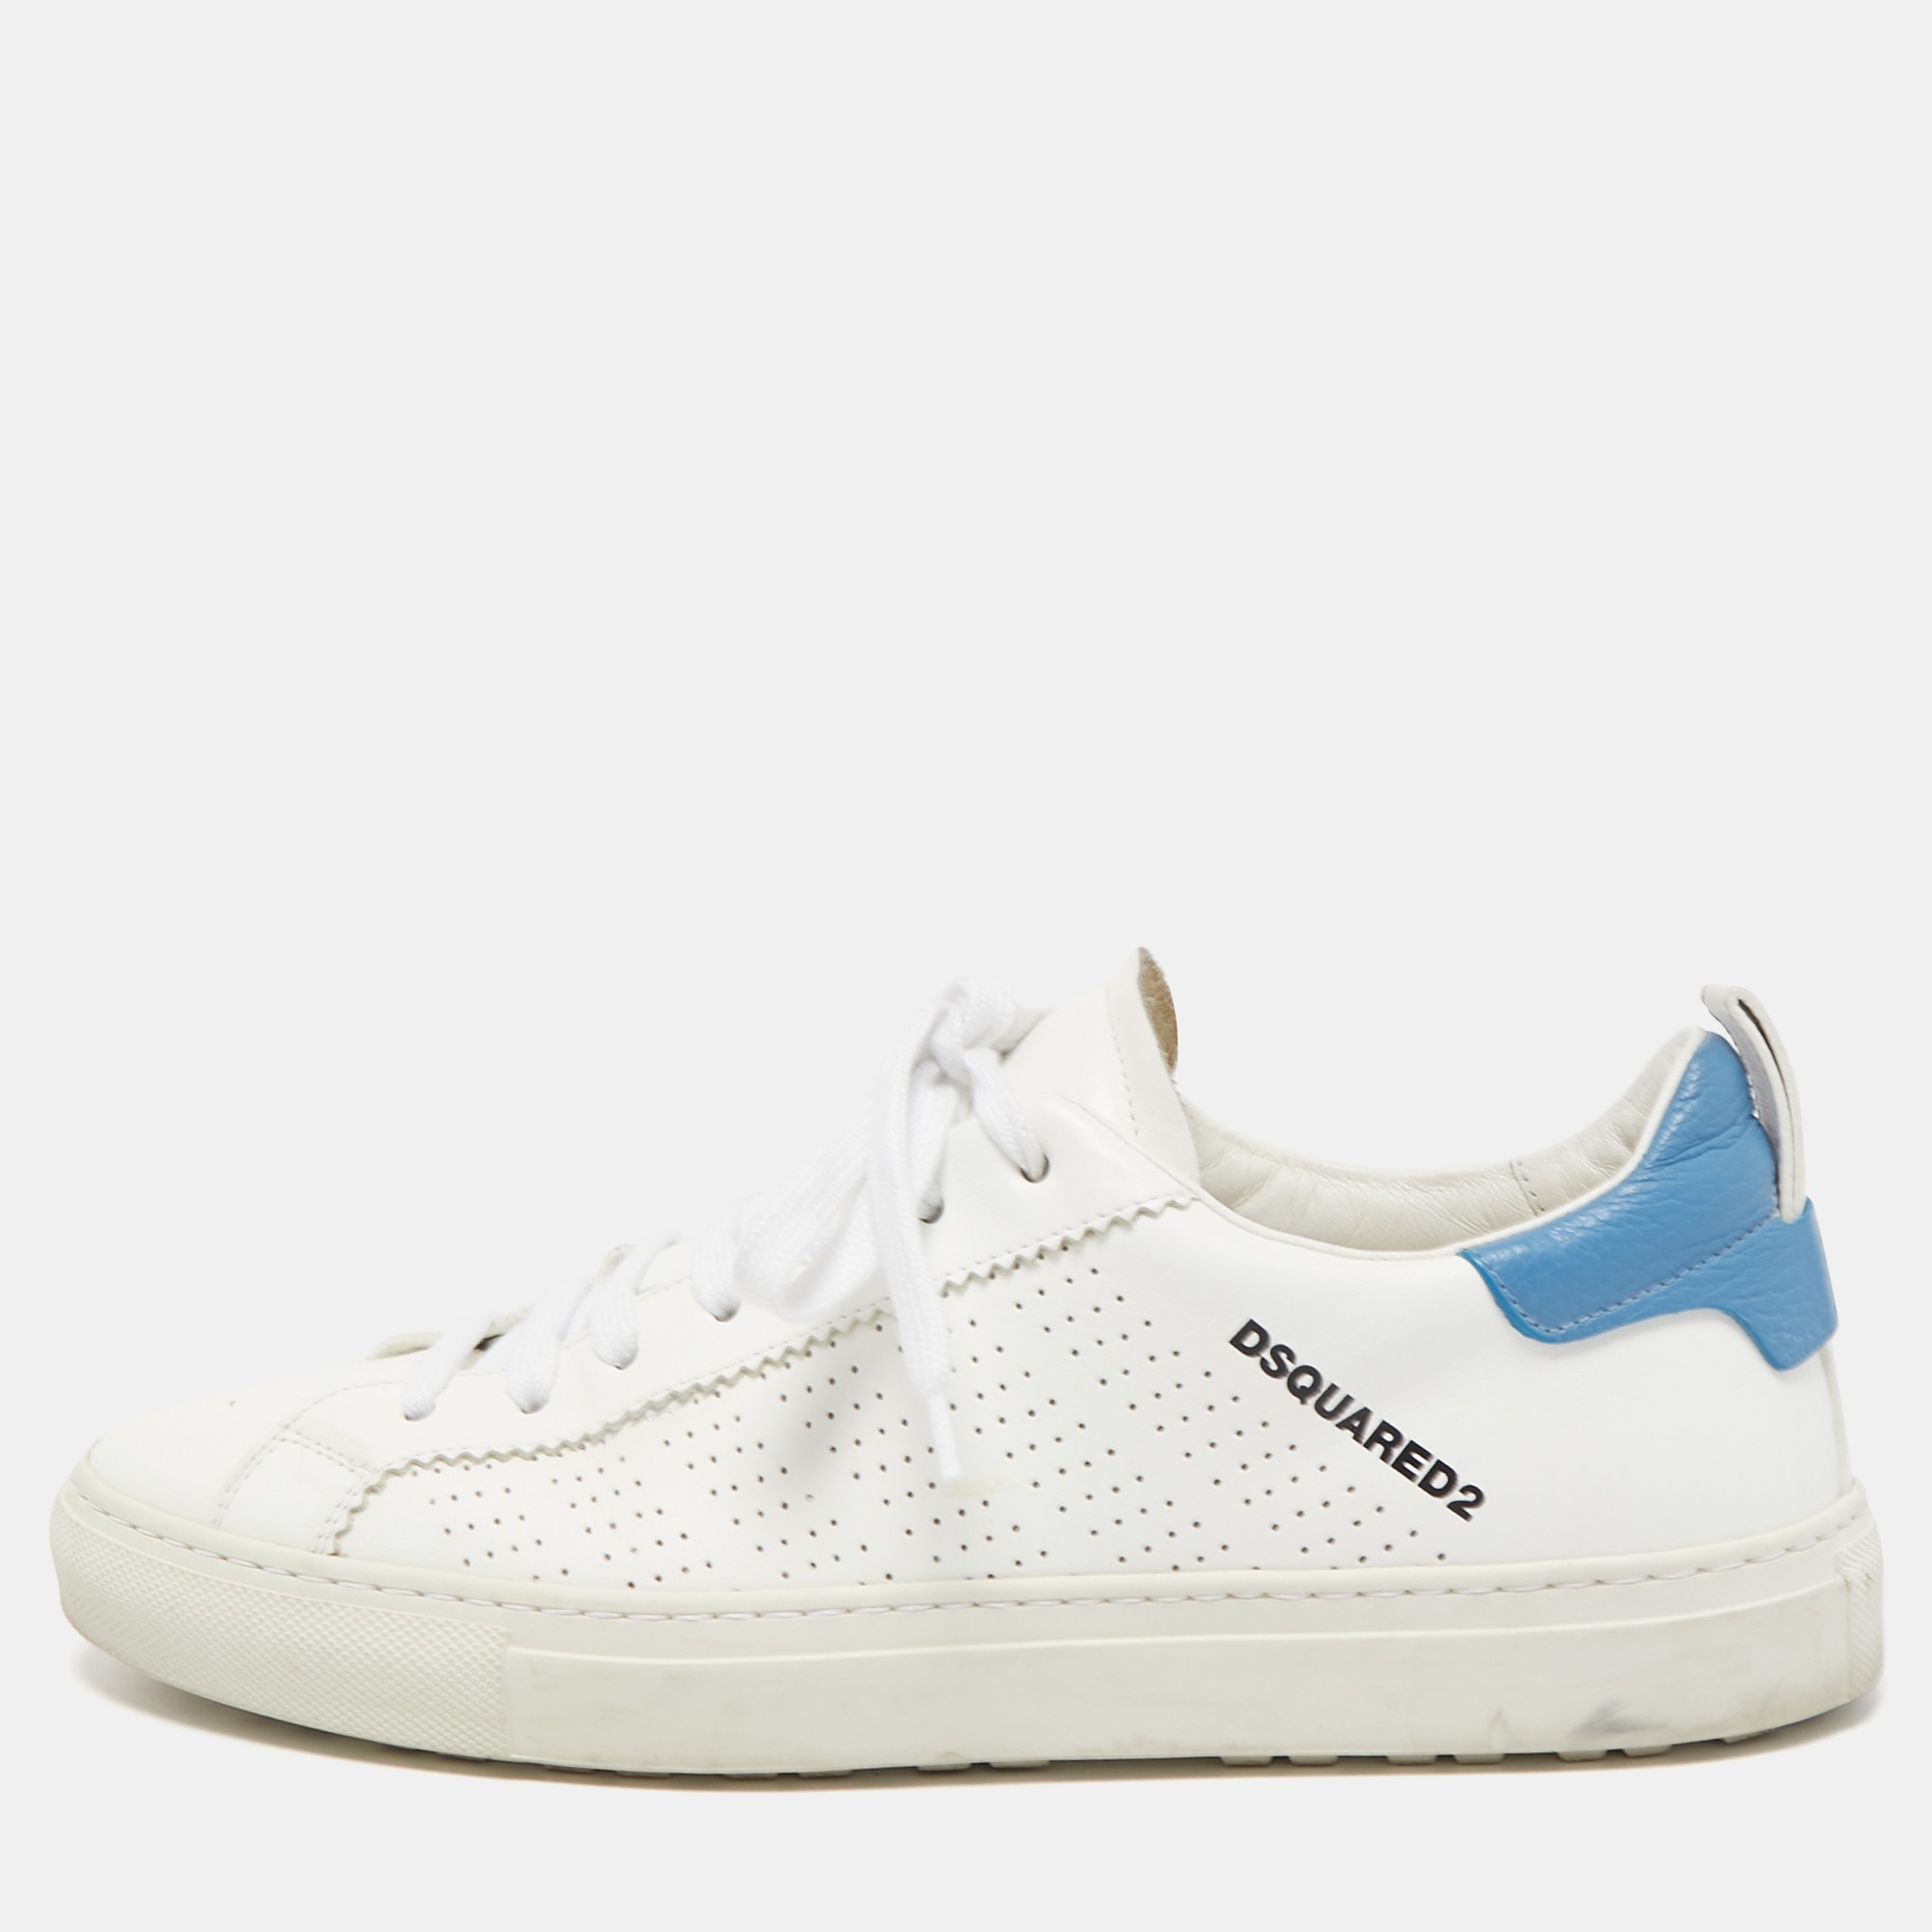 Dsquared2 White/Blue Perforated Leather Low Top Sneakers Size 41